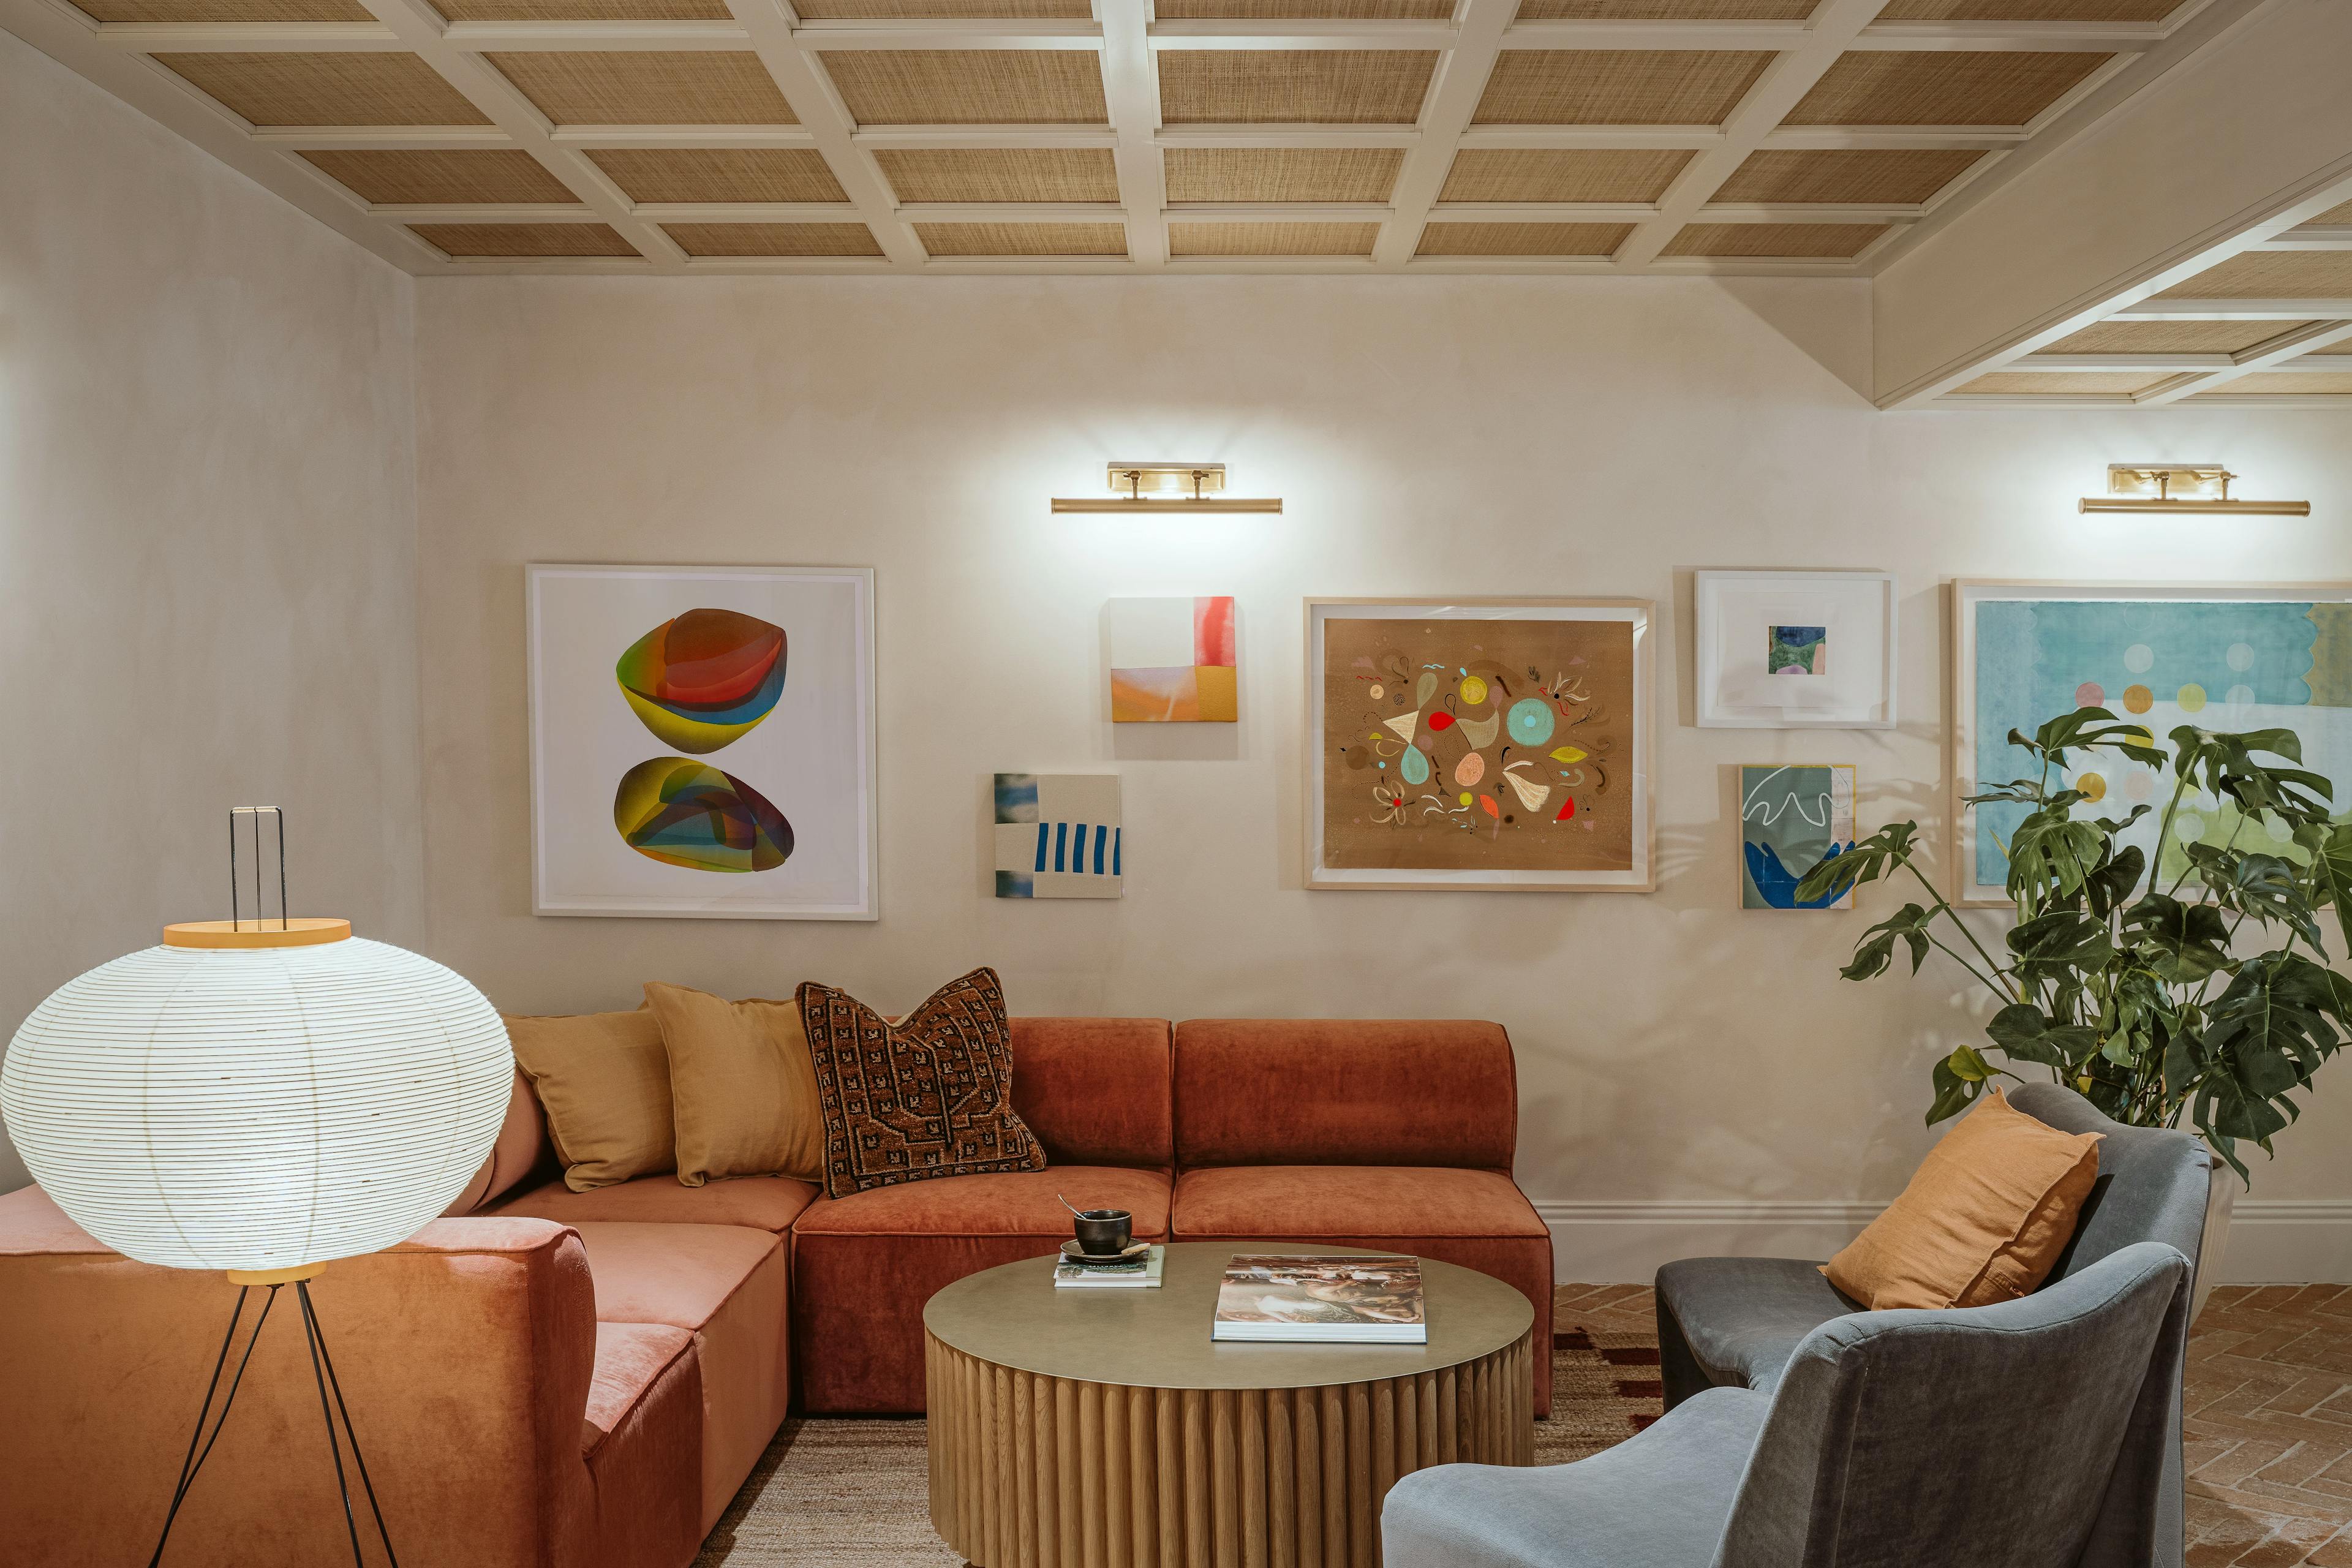 A gallery wall within a lounge area at the Chief London clubhouse, featuring different-sized artwork by artists Laura Berman, Anastasia Greer, Kayla Plosz Antiel, Misato Suzuki and Jessica Simorte.